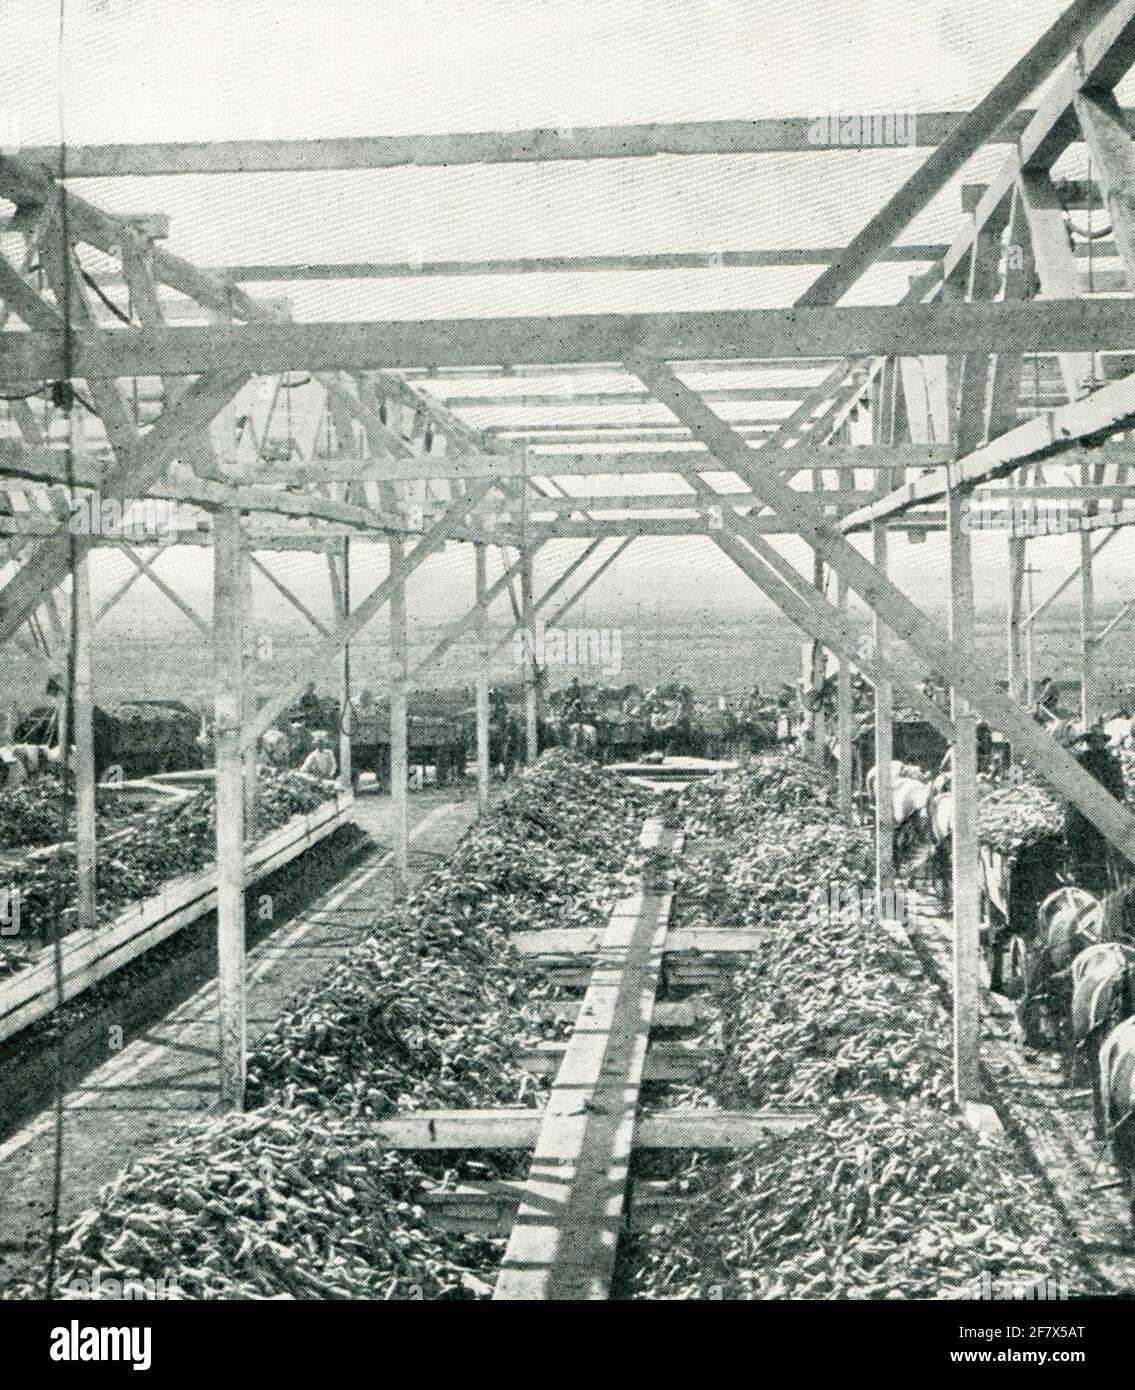 This 1903 photograph shows inside a beet sugar factory. Stock Photo